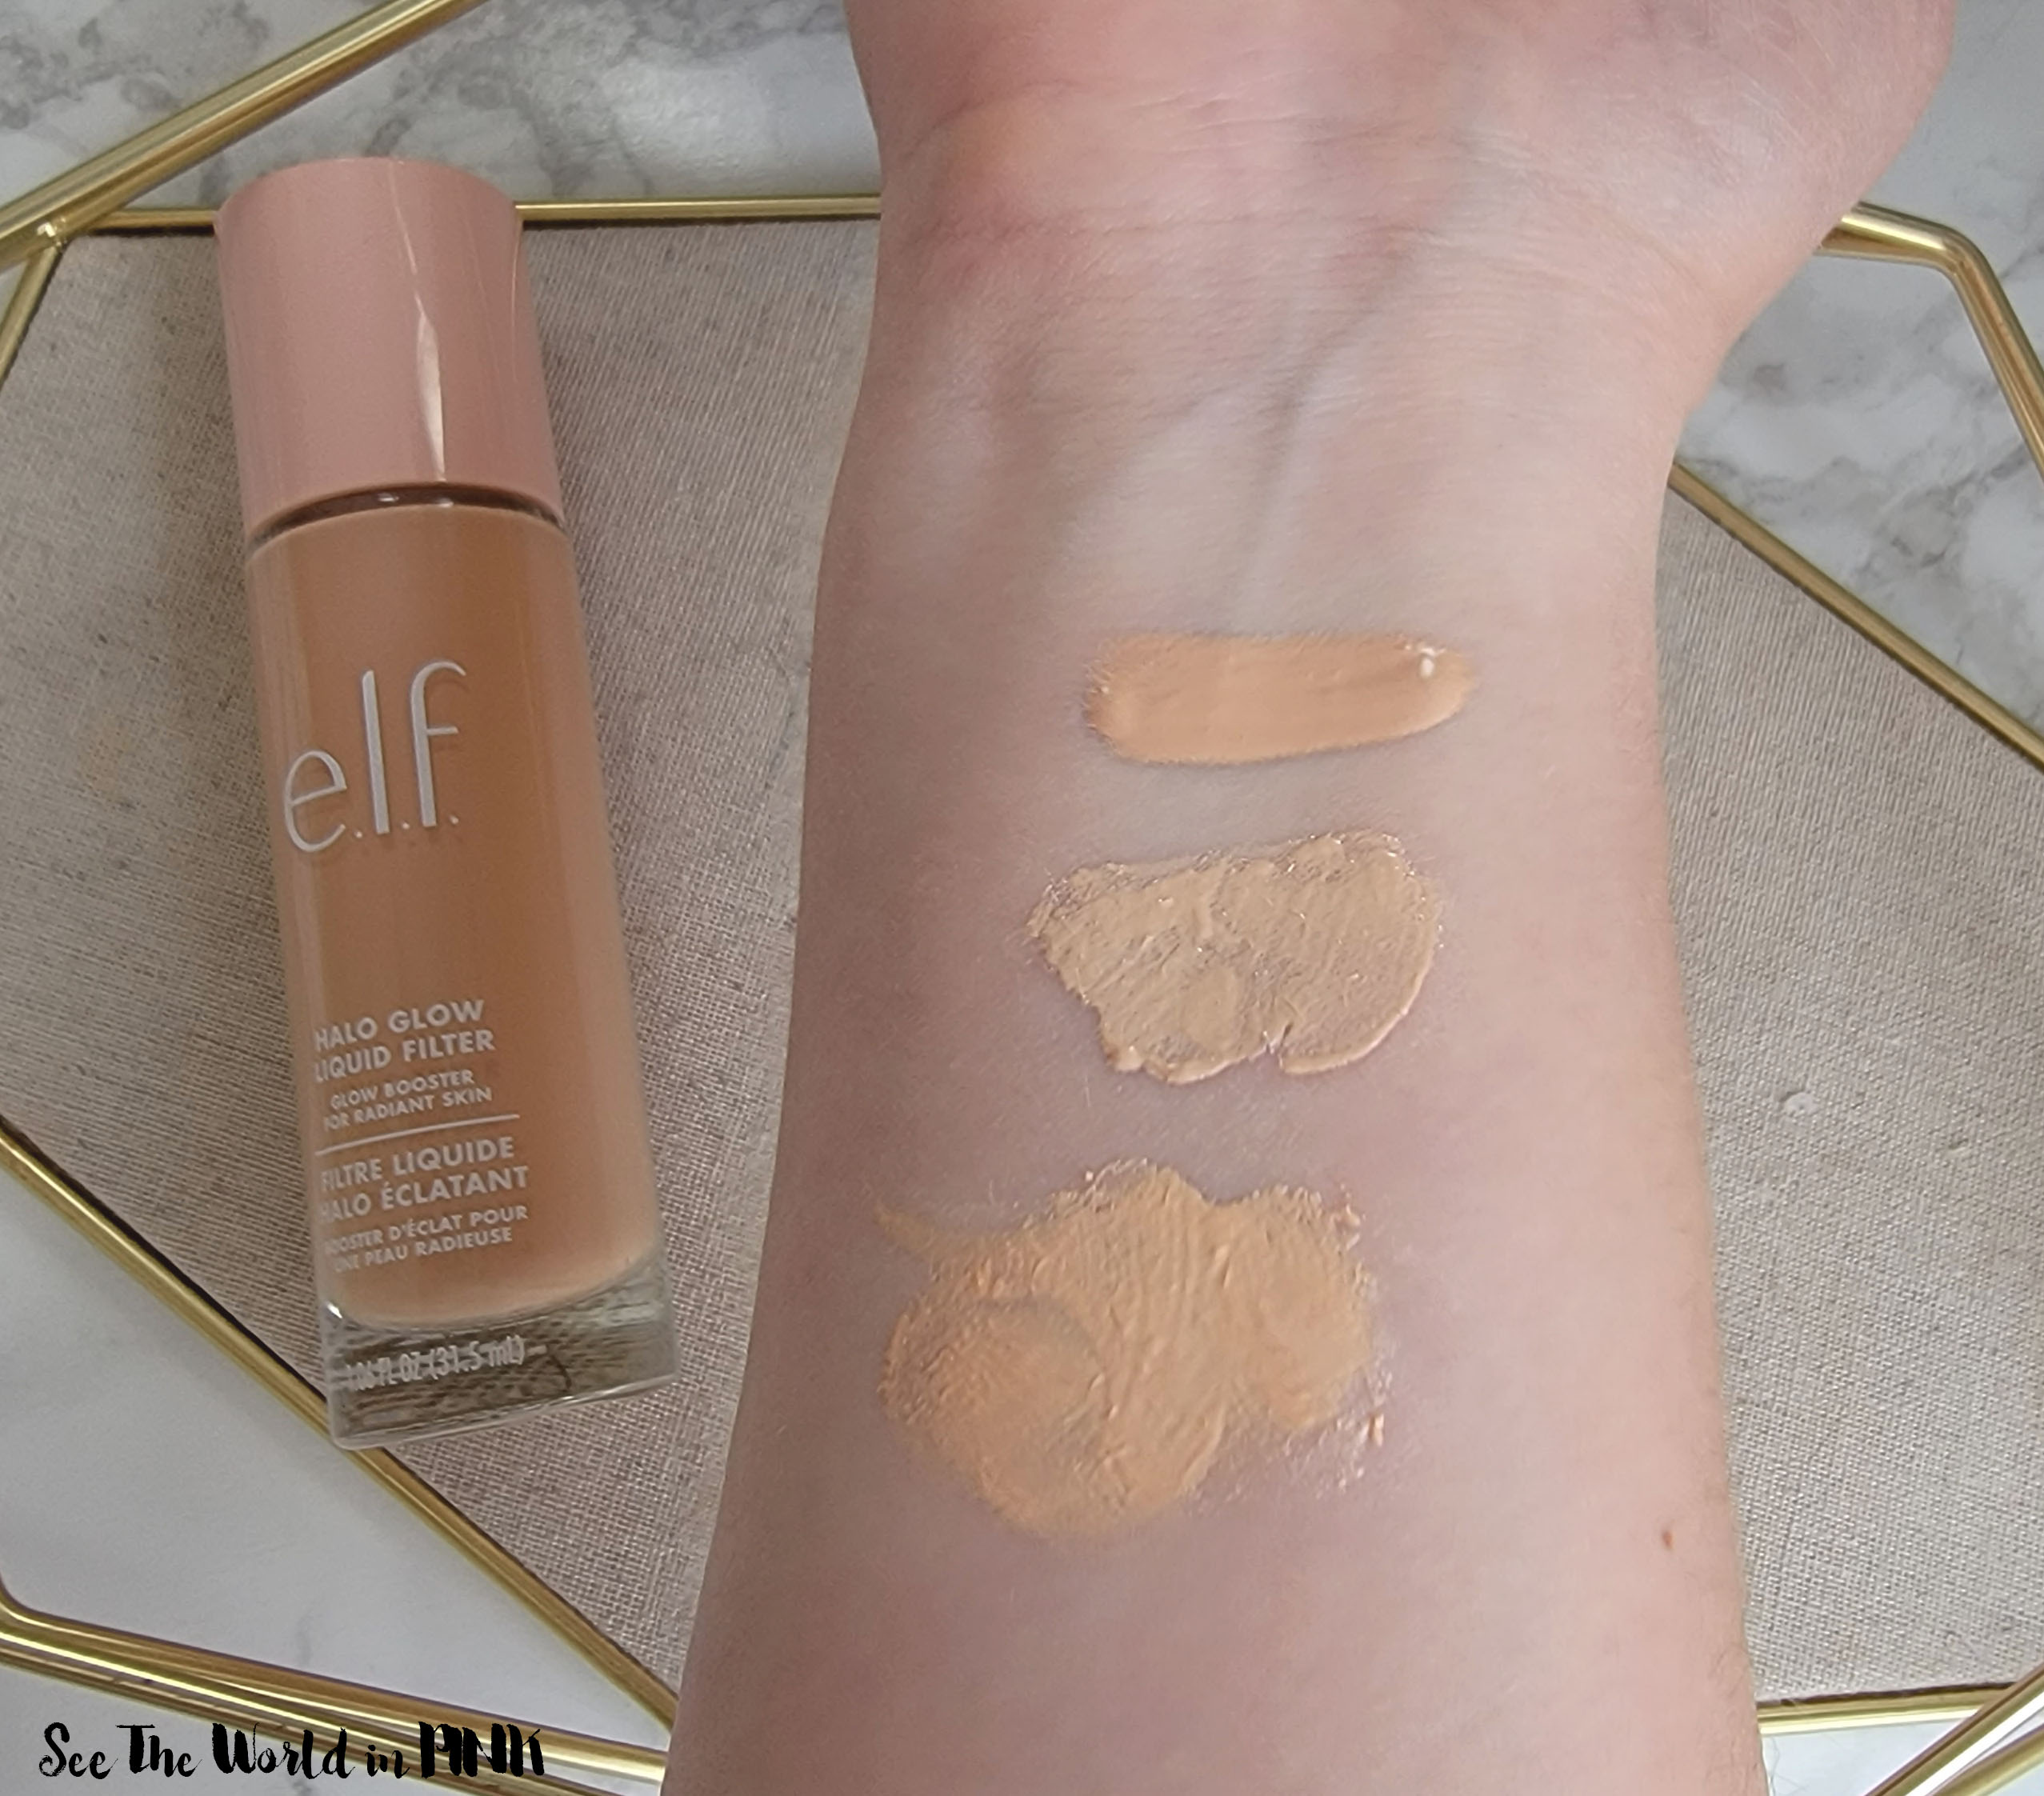 Glowing With New ELF Products - Whoa Glow SPF, Halo Glow Liquid Filter, Halo Glow Blush and Highlighter Beauty Wand, Lip Lacquer, and Lash 'N Roll Mascara